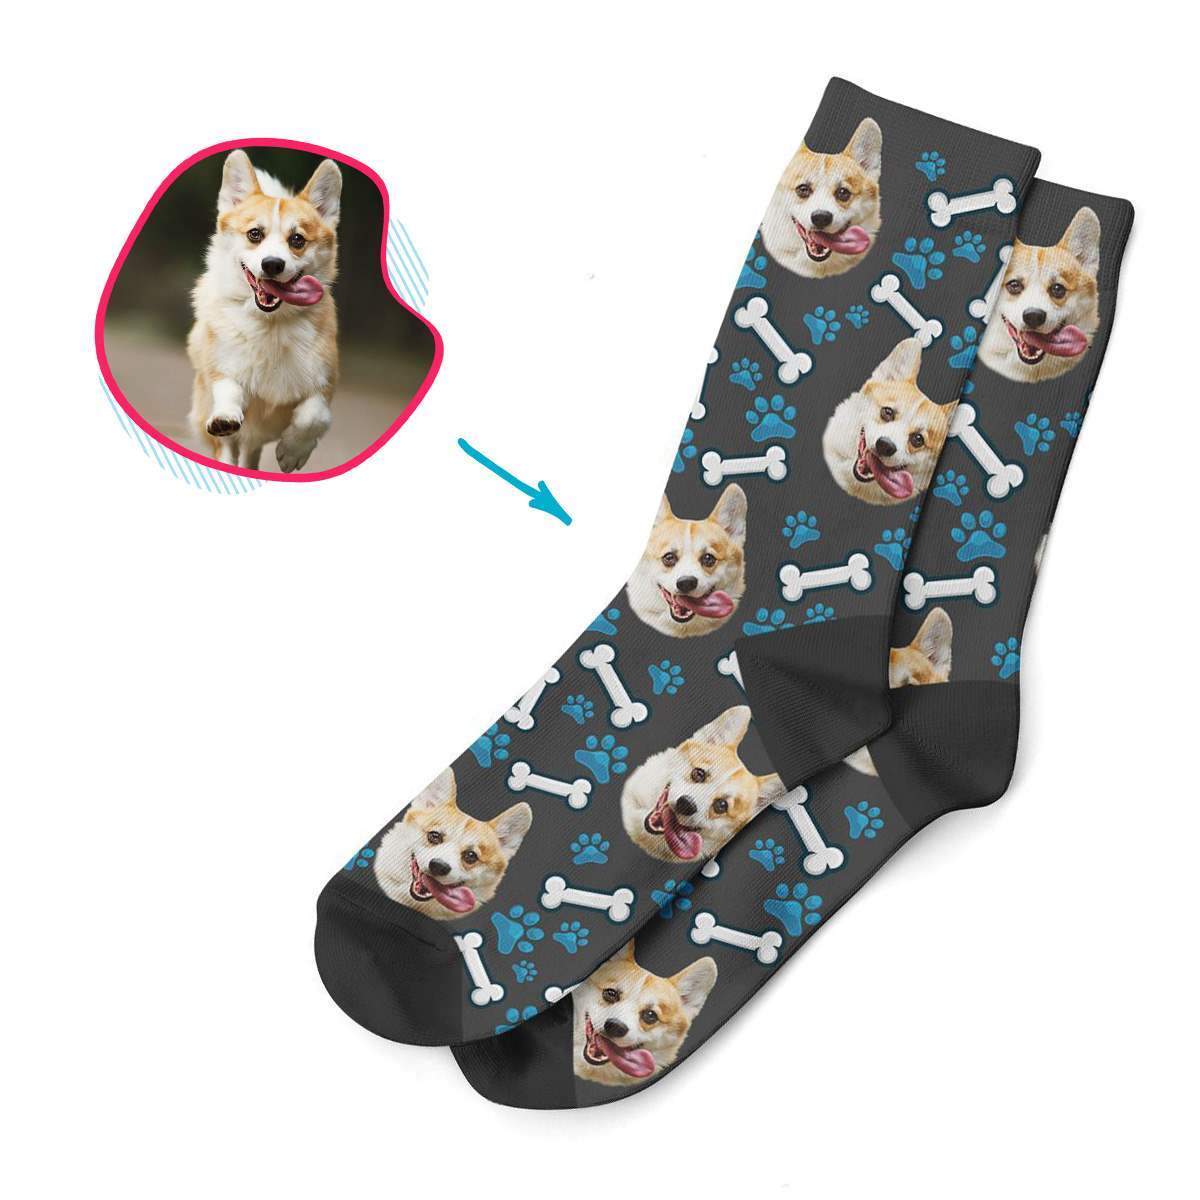 dark Dog socks personalized with photo of face printed on them